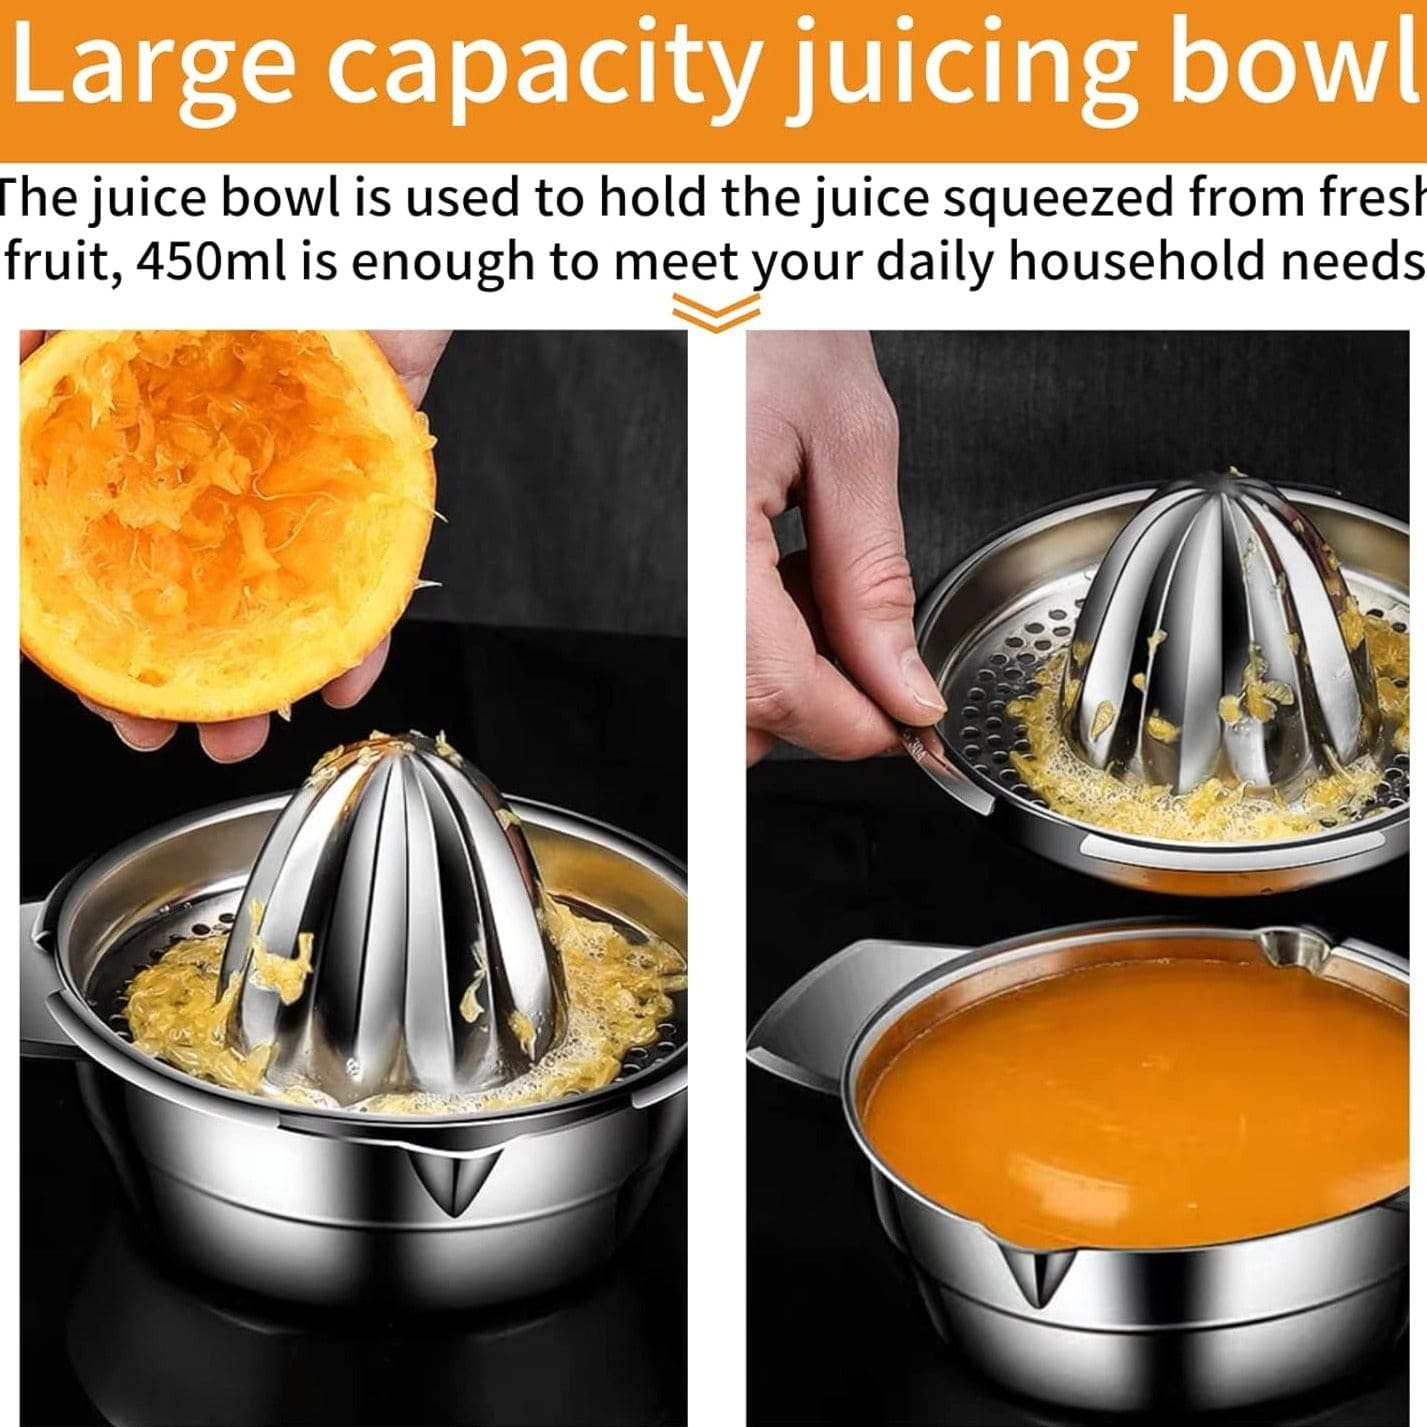 Manual Hand Press Squeezer With Bowl, Stainless Steel Fruit Squeezer, Household Pressed Juice Maker, Lime & Orange Squeezer with Built-In Bowl & Strainer